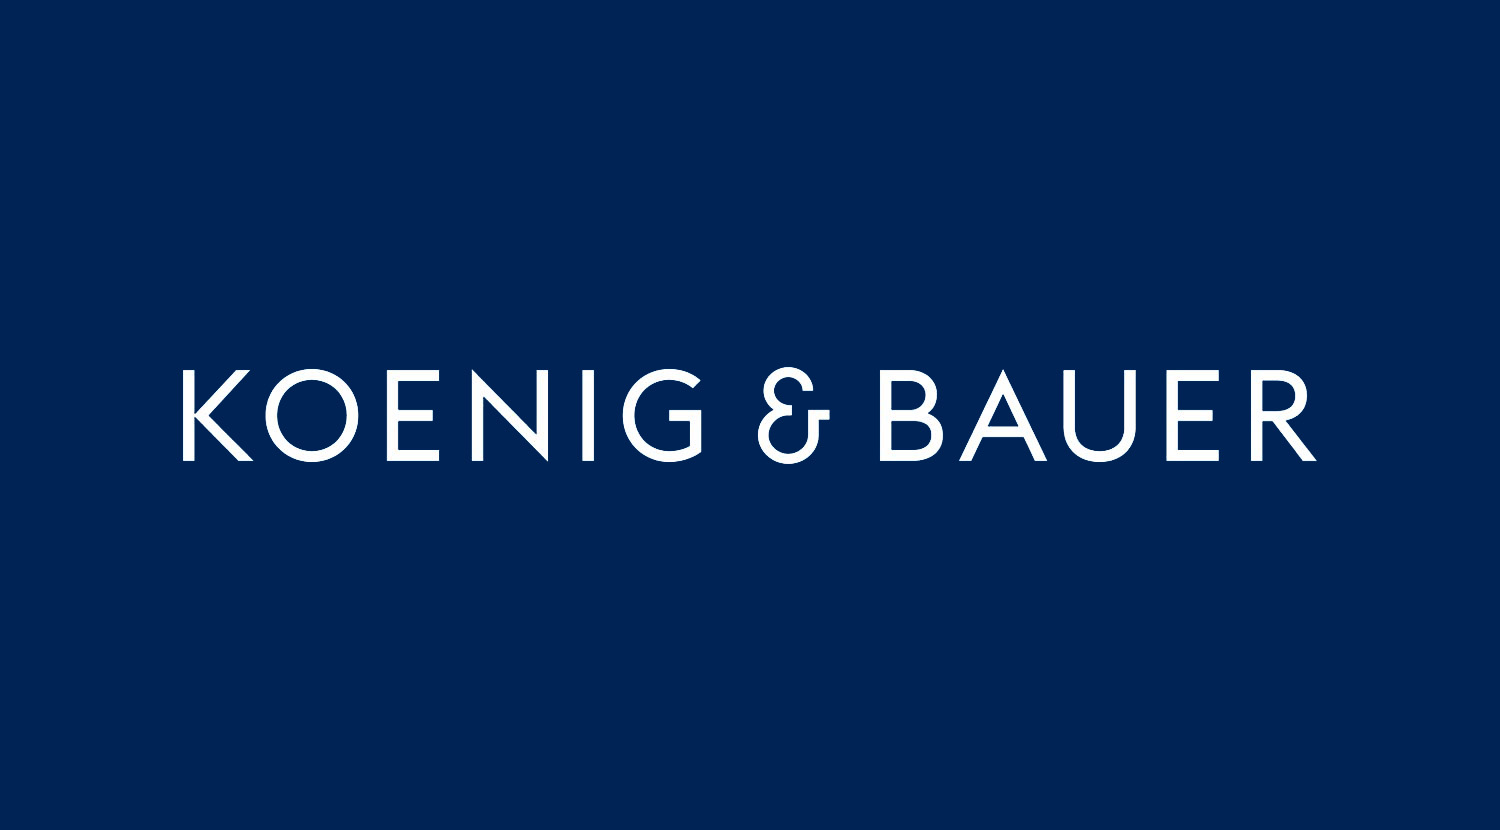 With clear strategy and new market appearance into the 3rd century | Koenig  & Bauer | we're on it.